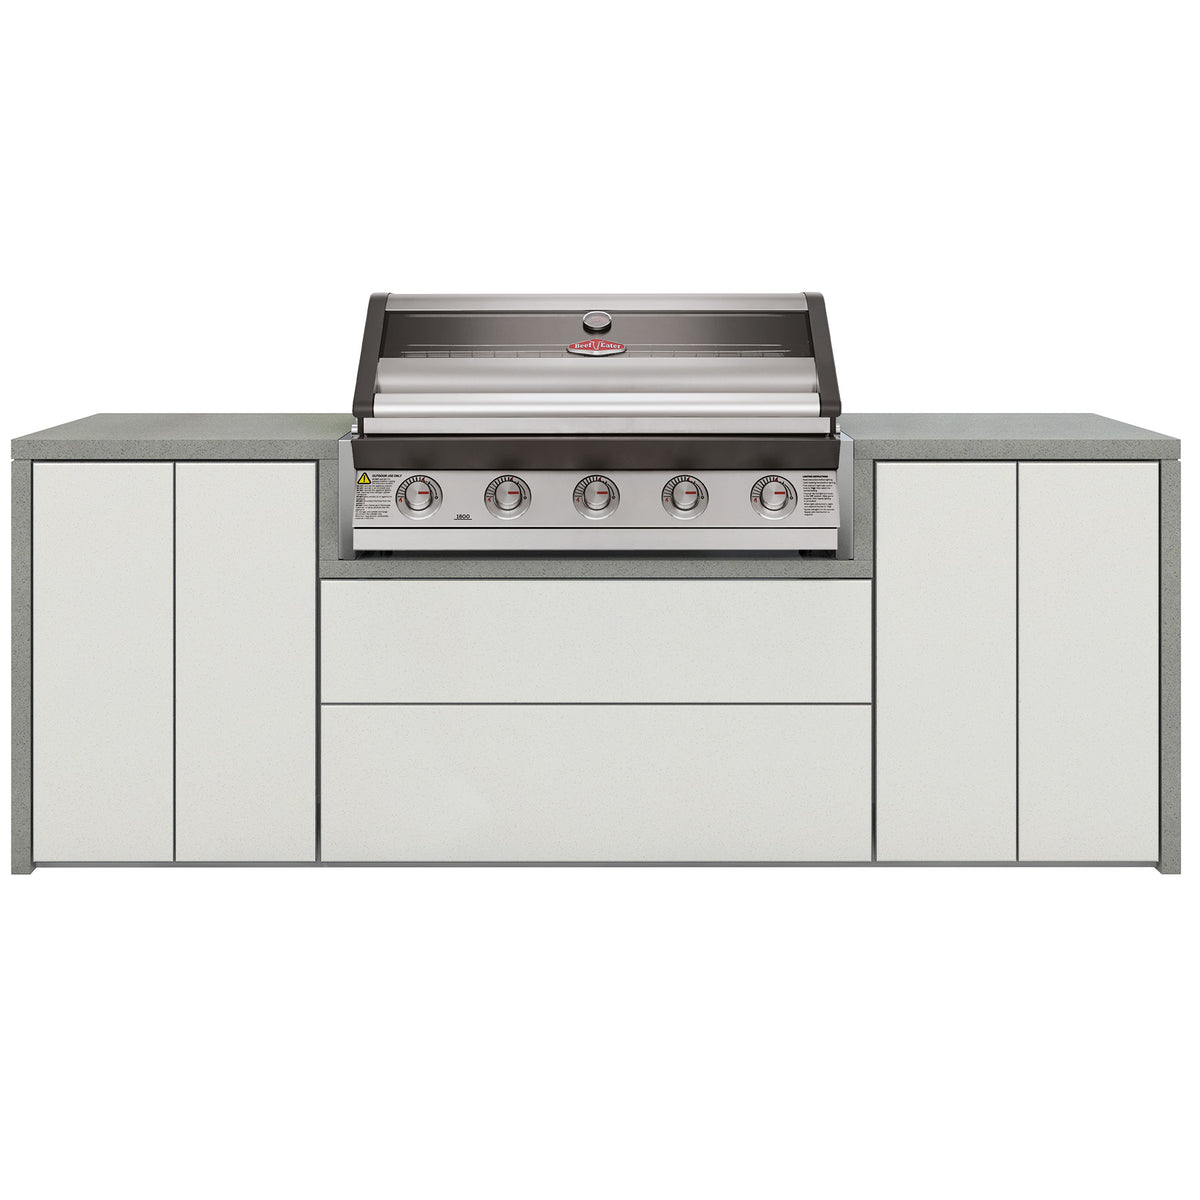 BeefEater Harmony Outdoor Kitchen with 1600 Series 5 Burner Stainless Steel BBQ